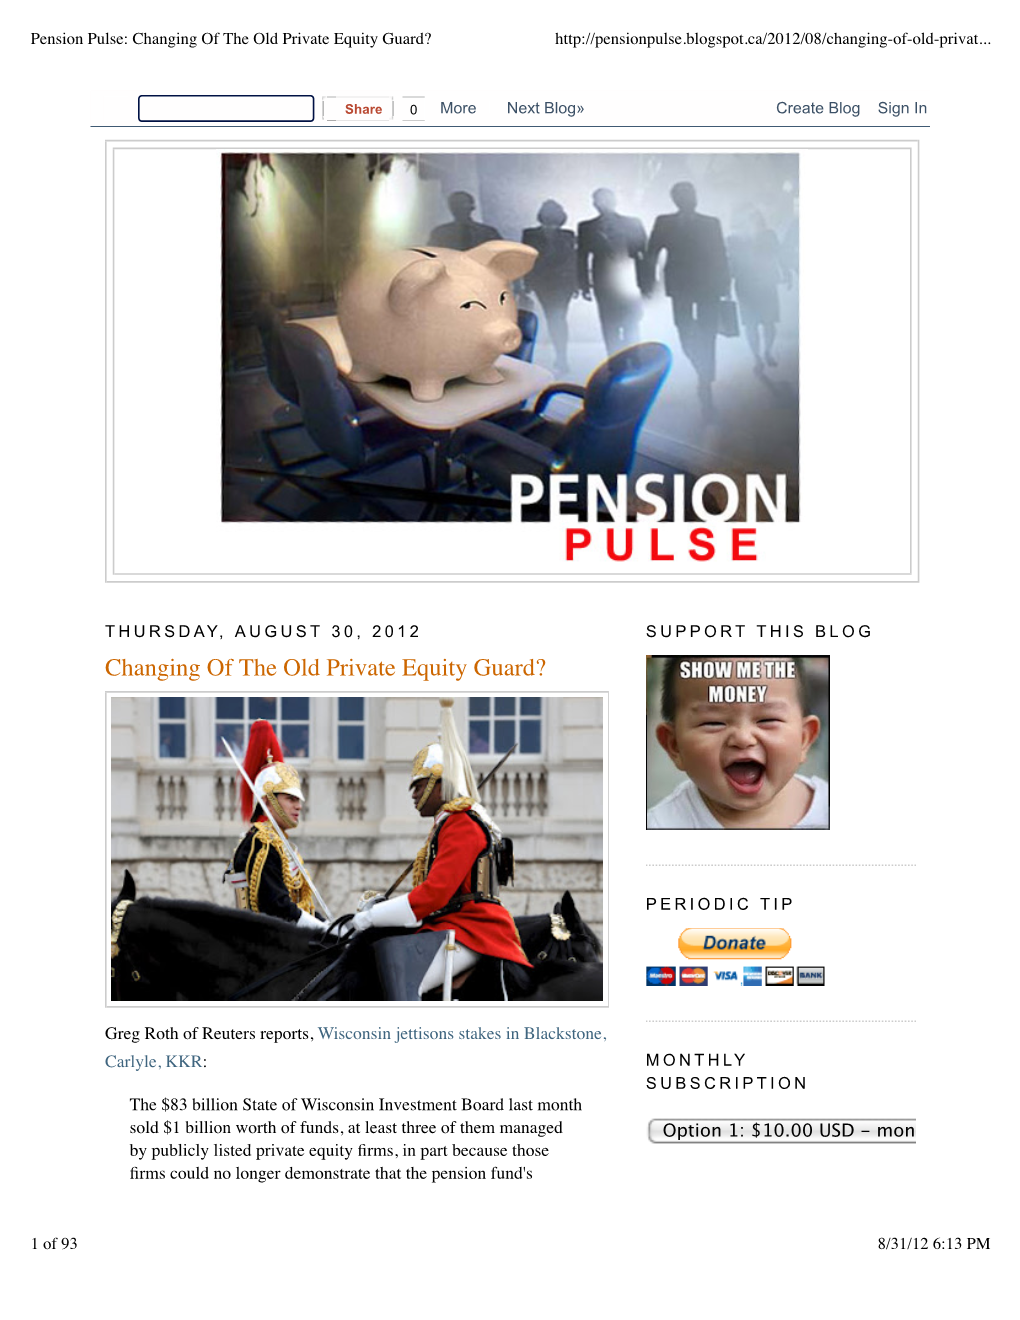 Pension Pulse: Changing of the Old Private Equity Guard?